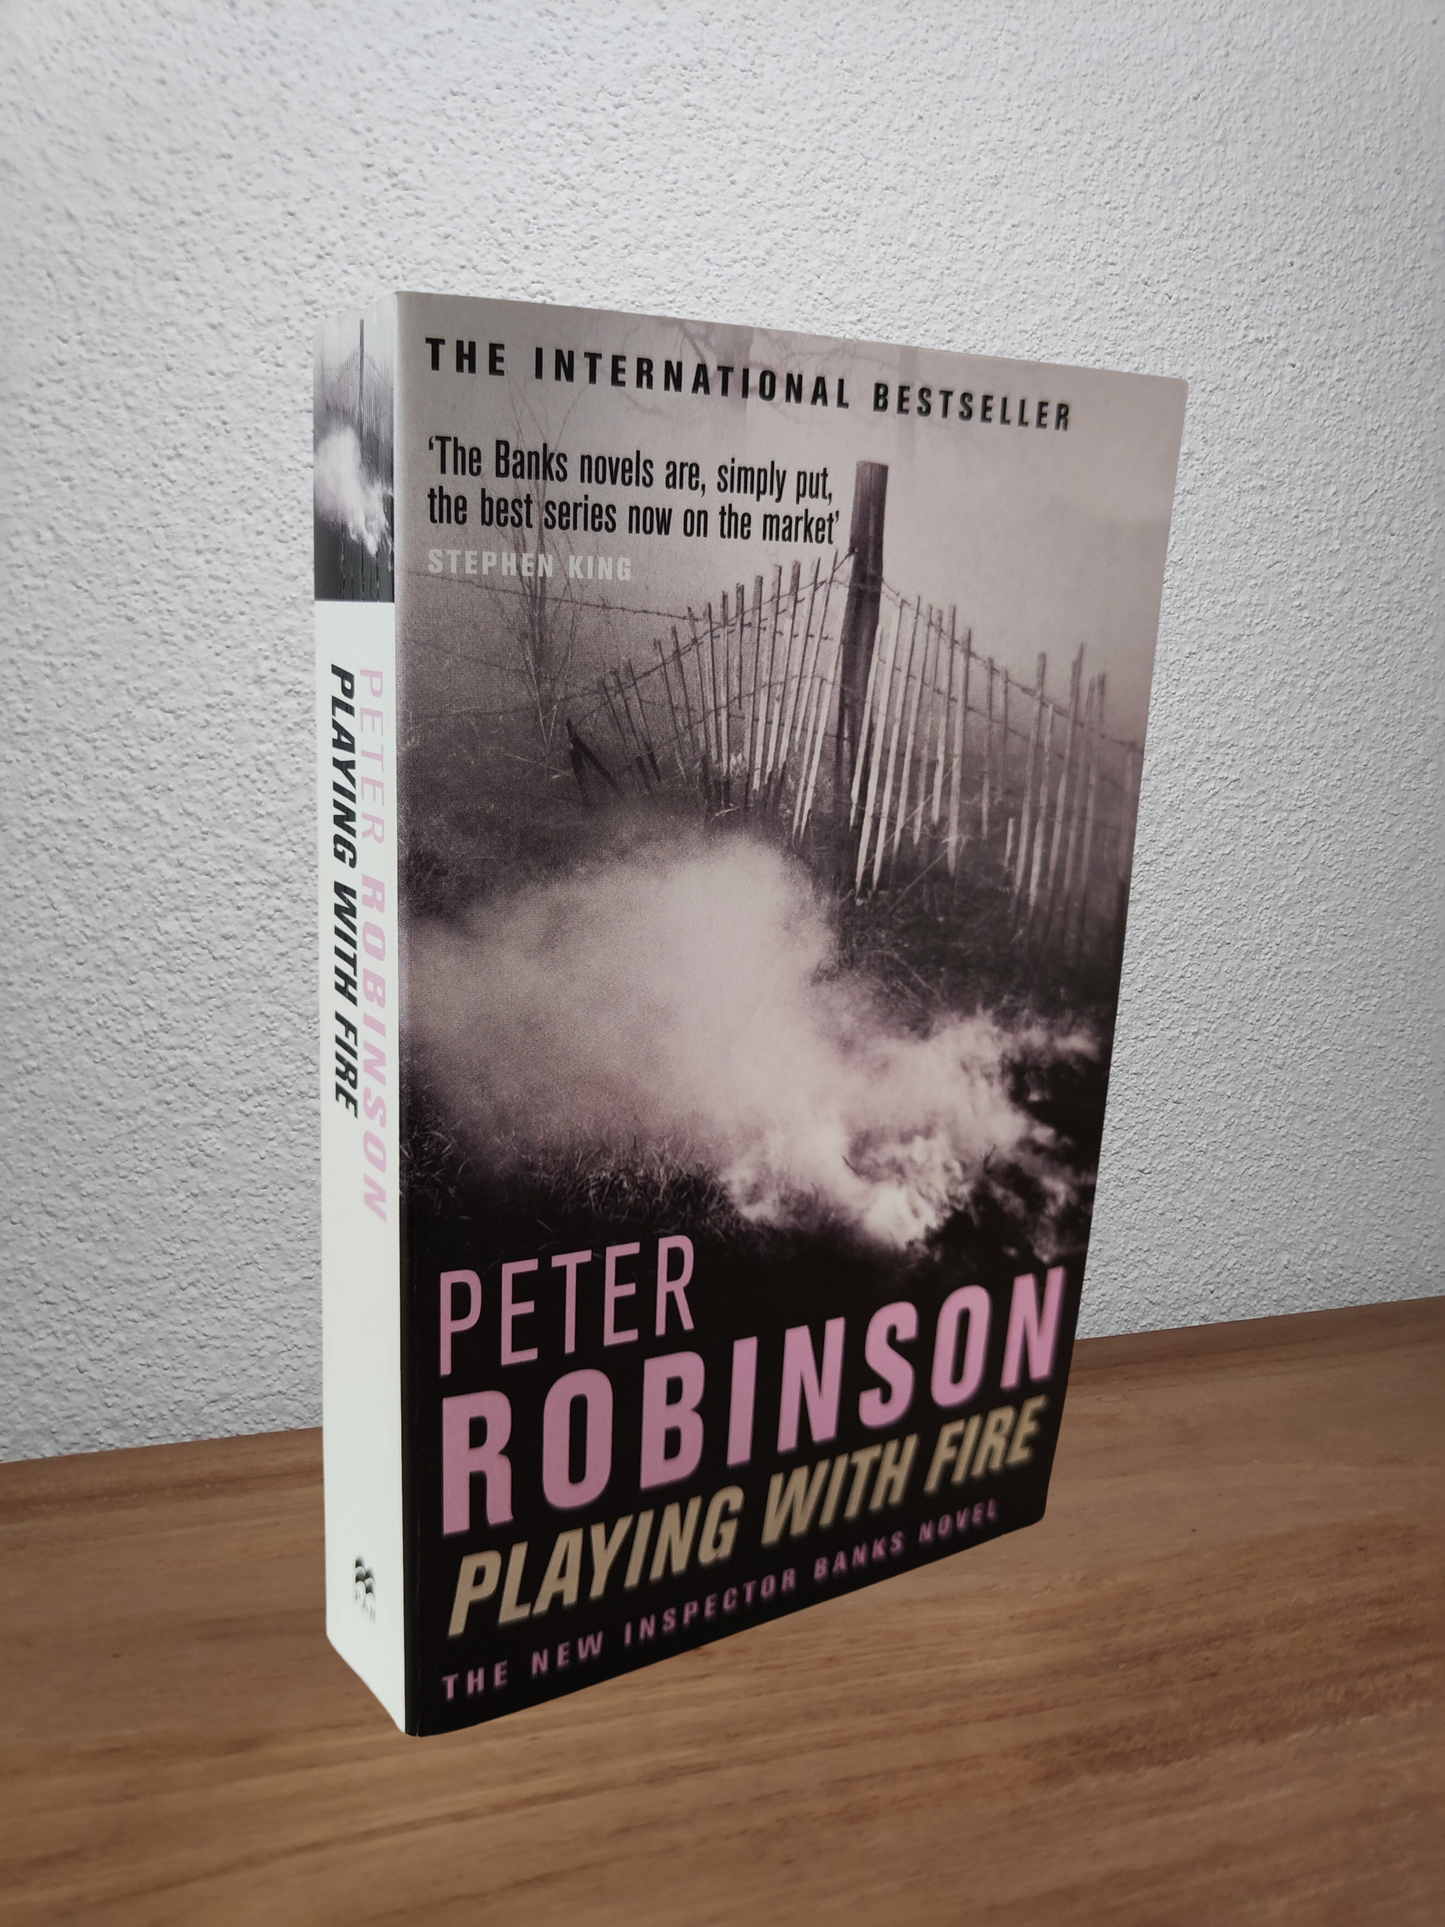 Peter Robinson - Playing with Fire (Inspector Banks #14)